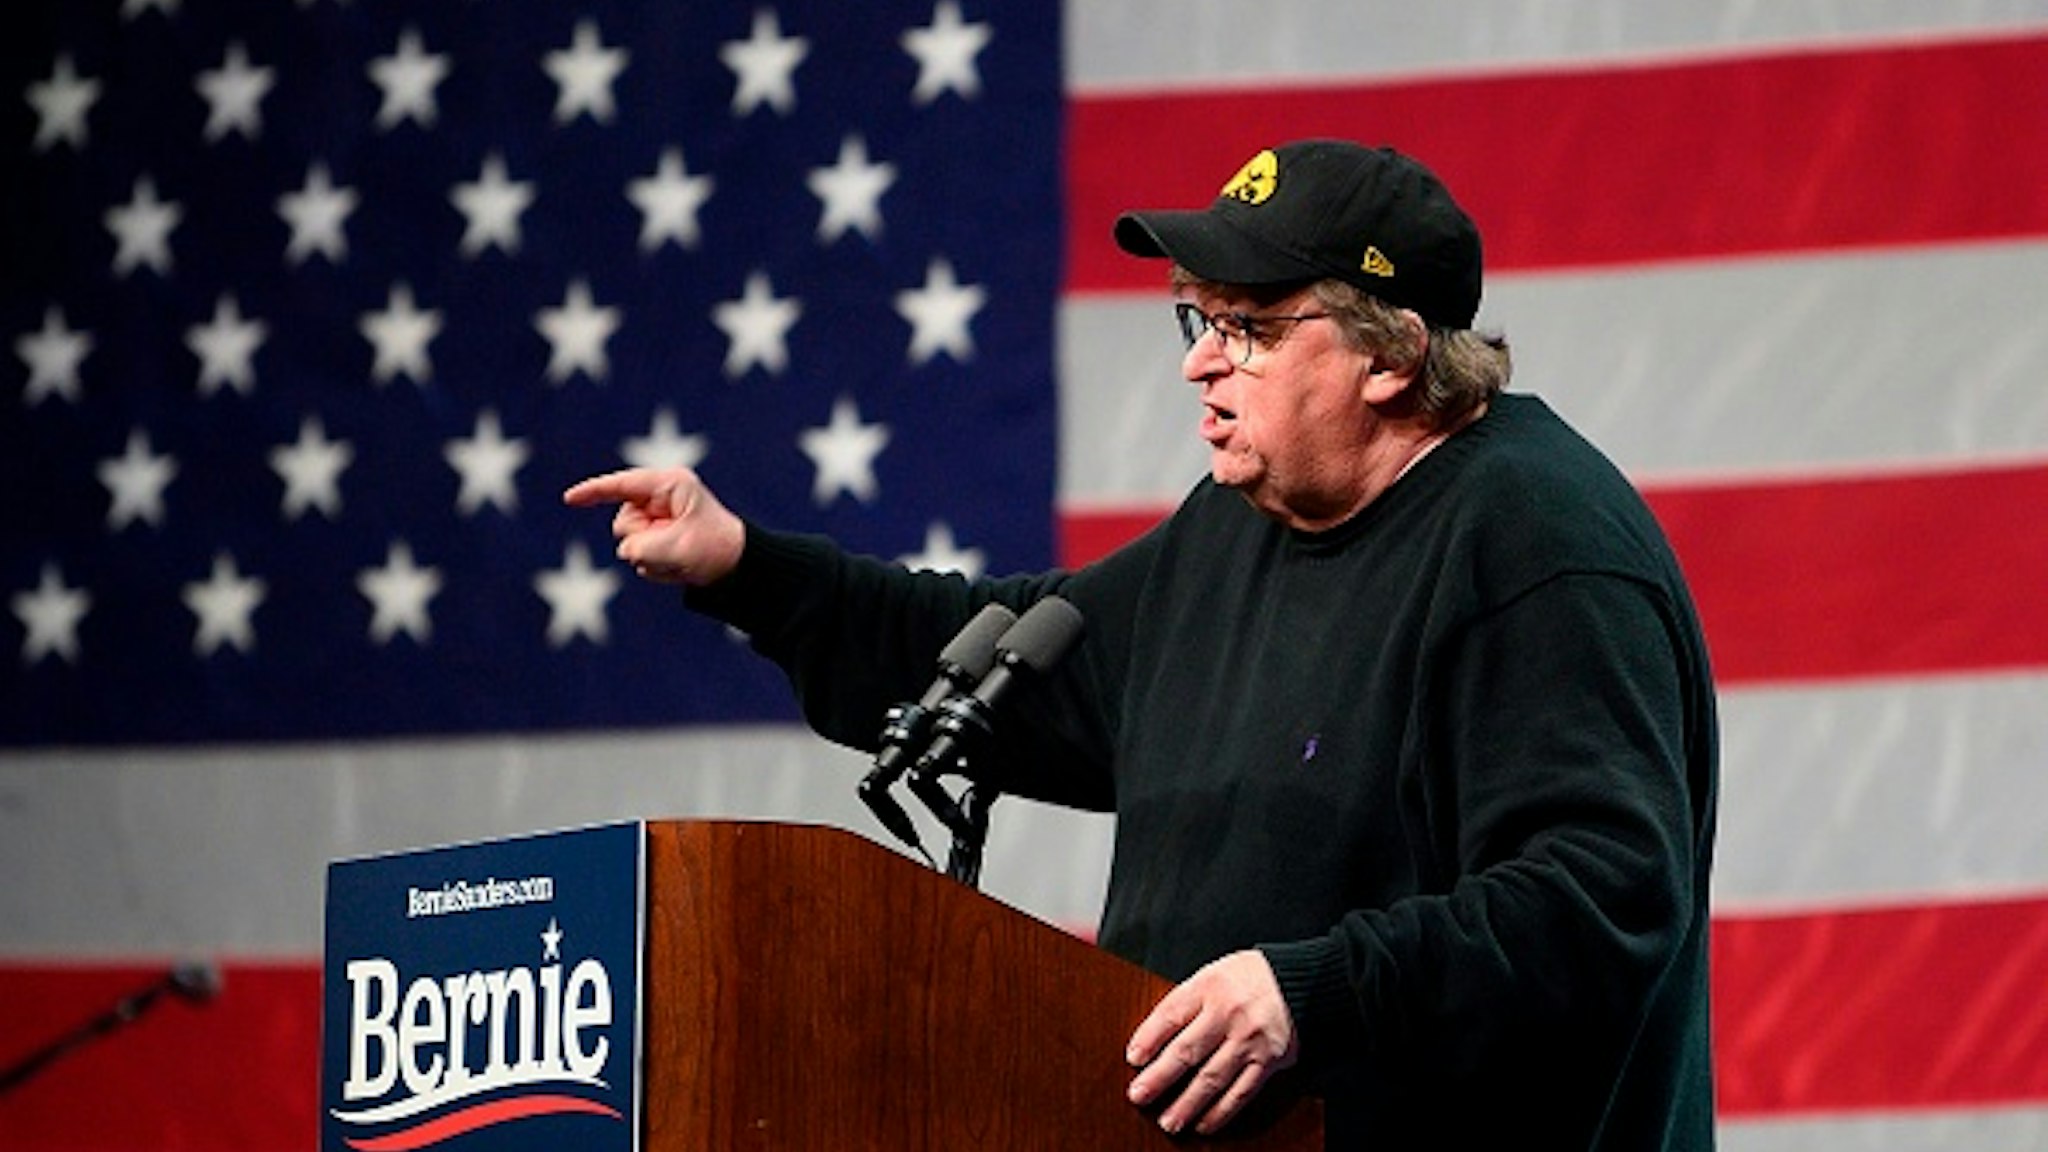 US filmmaker-author-activist Michael Moore, speaks to supporters of Democratic presidential candidate Senator Bernie Sanders at a campaign event in Clive, Iowa, on January 31, 2020.